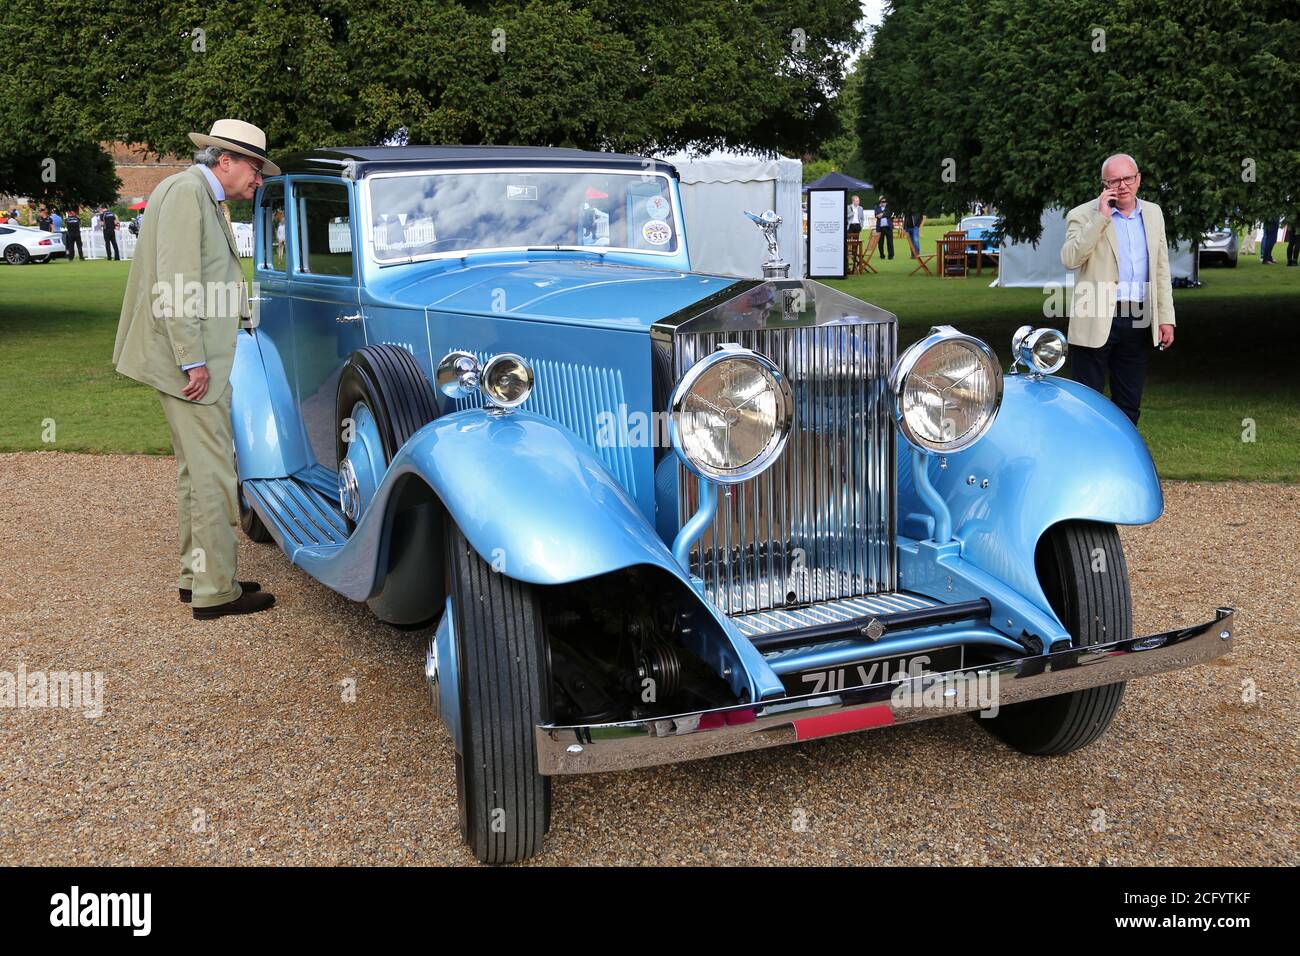 Rolls-Royce Phantom II Continental Sports Saloon (1933), Concours of Elegance 2020, Hampton court Palace, Londres, Royaume-Uni, Europe Banque D'Images